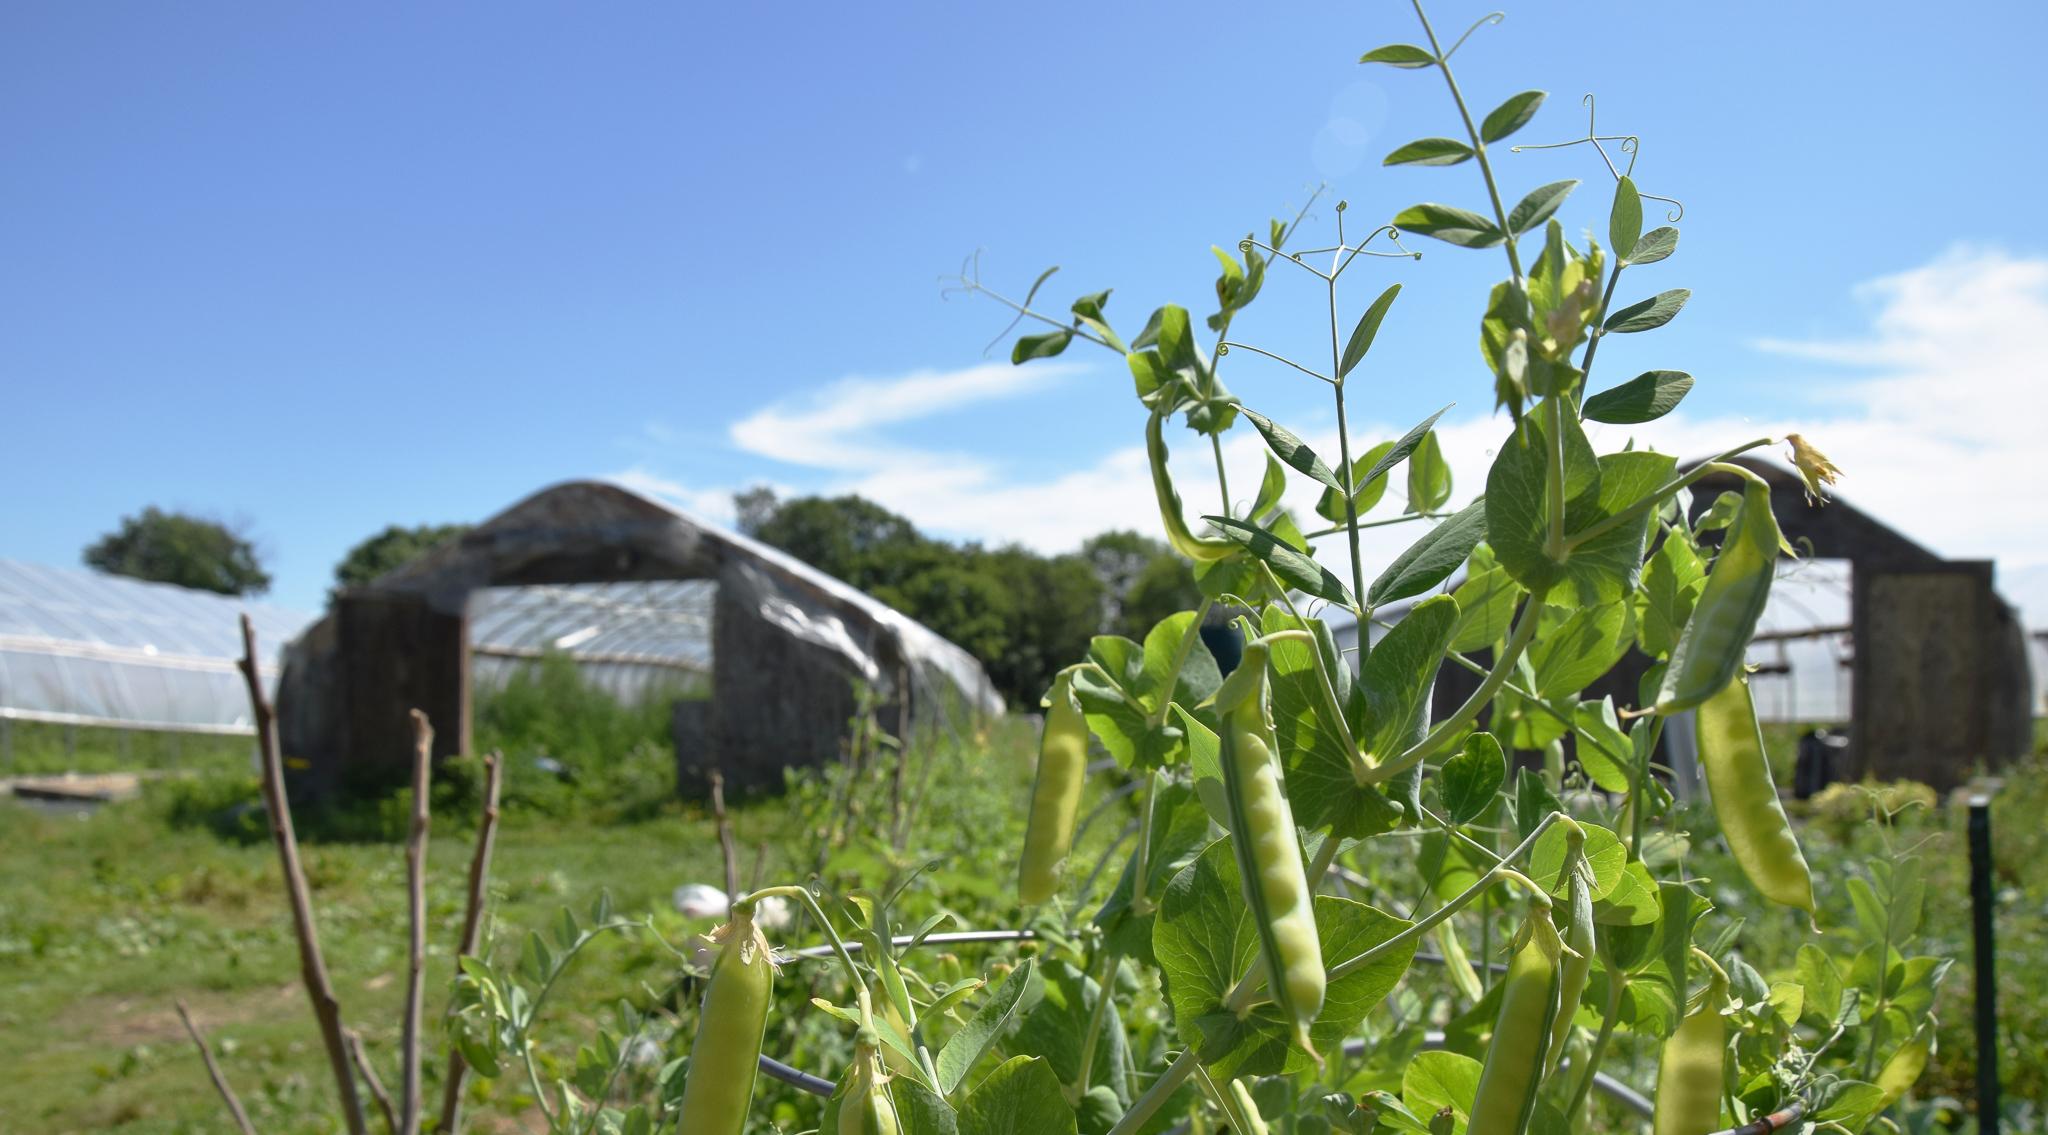 A vine of peas is in the foreground and hoop houses set against a blue sky are in the background.